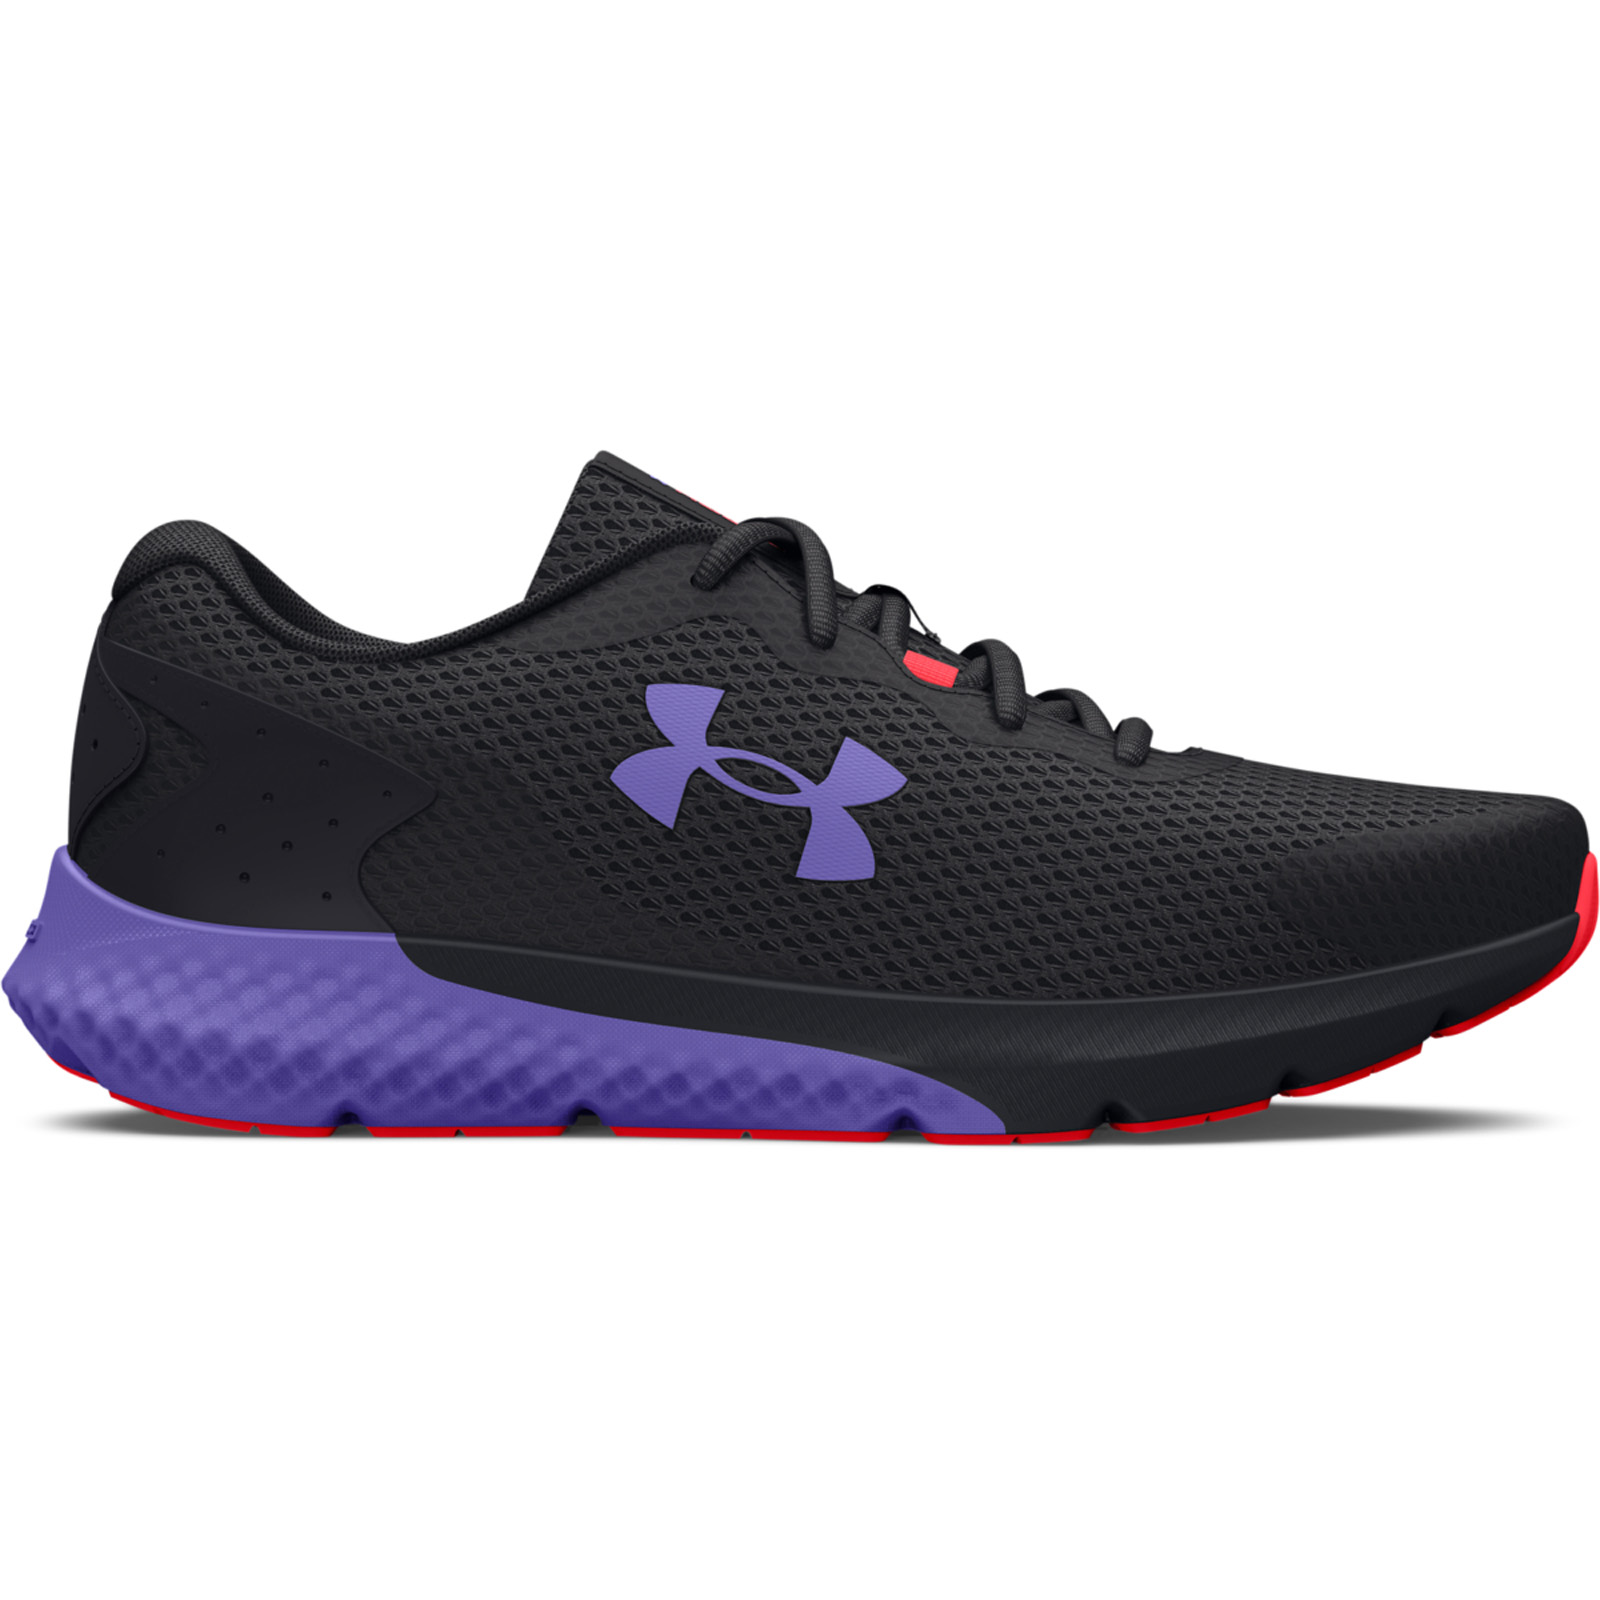 Under Armour - Women's UA Charged Rogue 3 Running Shoes - Black/Violet Storm/Violet Storm Γυναικεία > Παπούτσια > Αθλητικά > Παπούτσι Low Cut